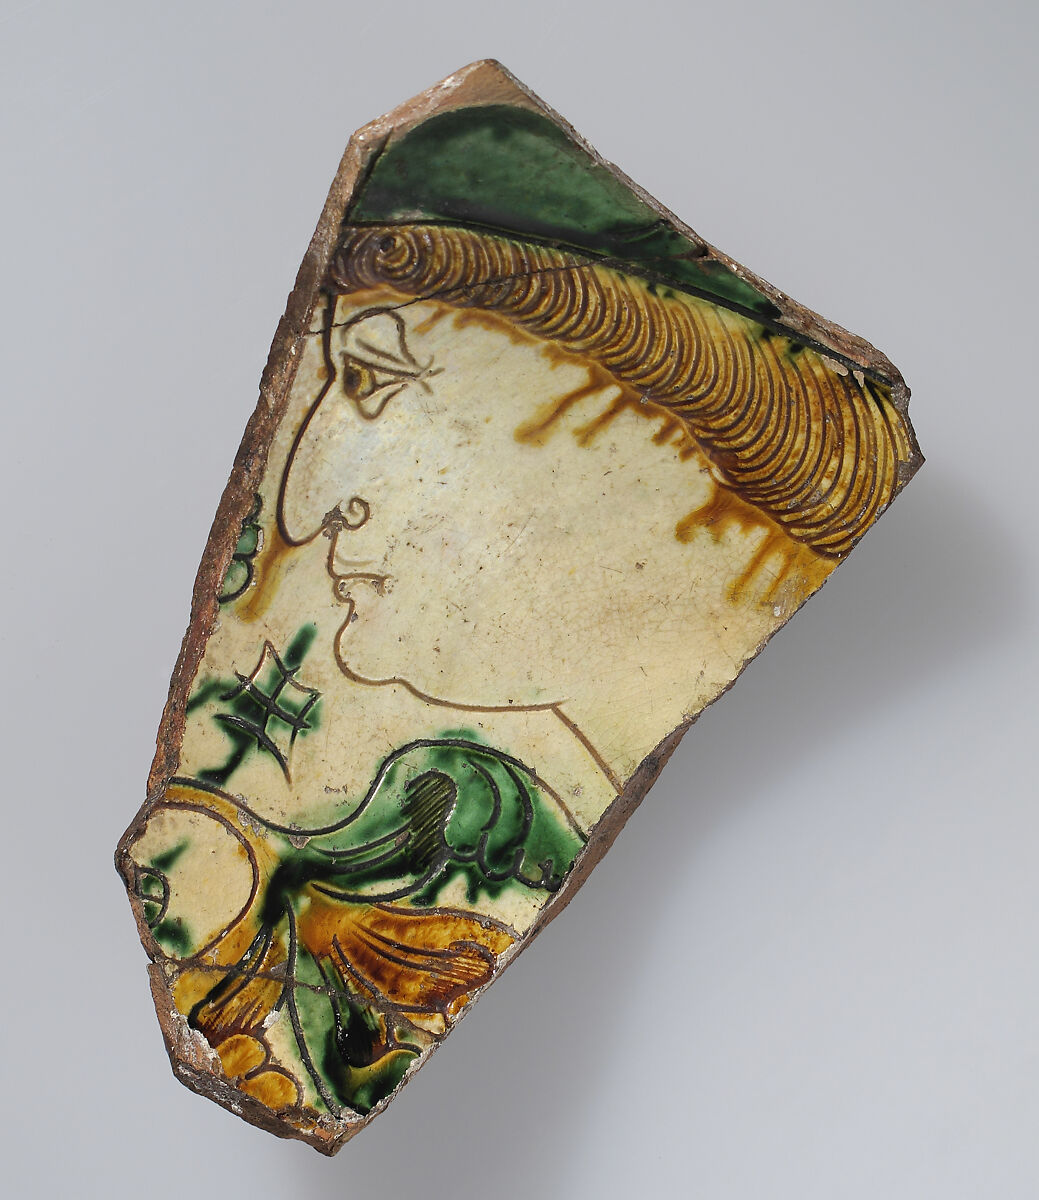 Fragment from a Vessel, Incised slipware with lead glaze, North Italian 